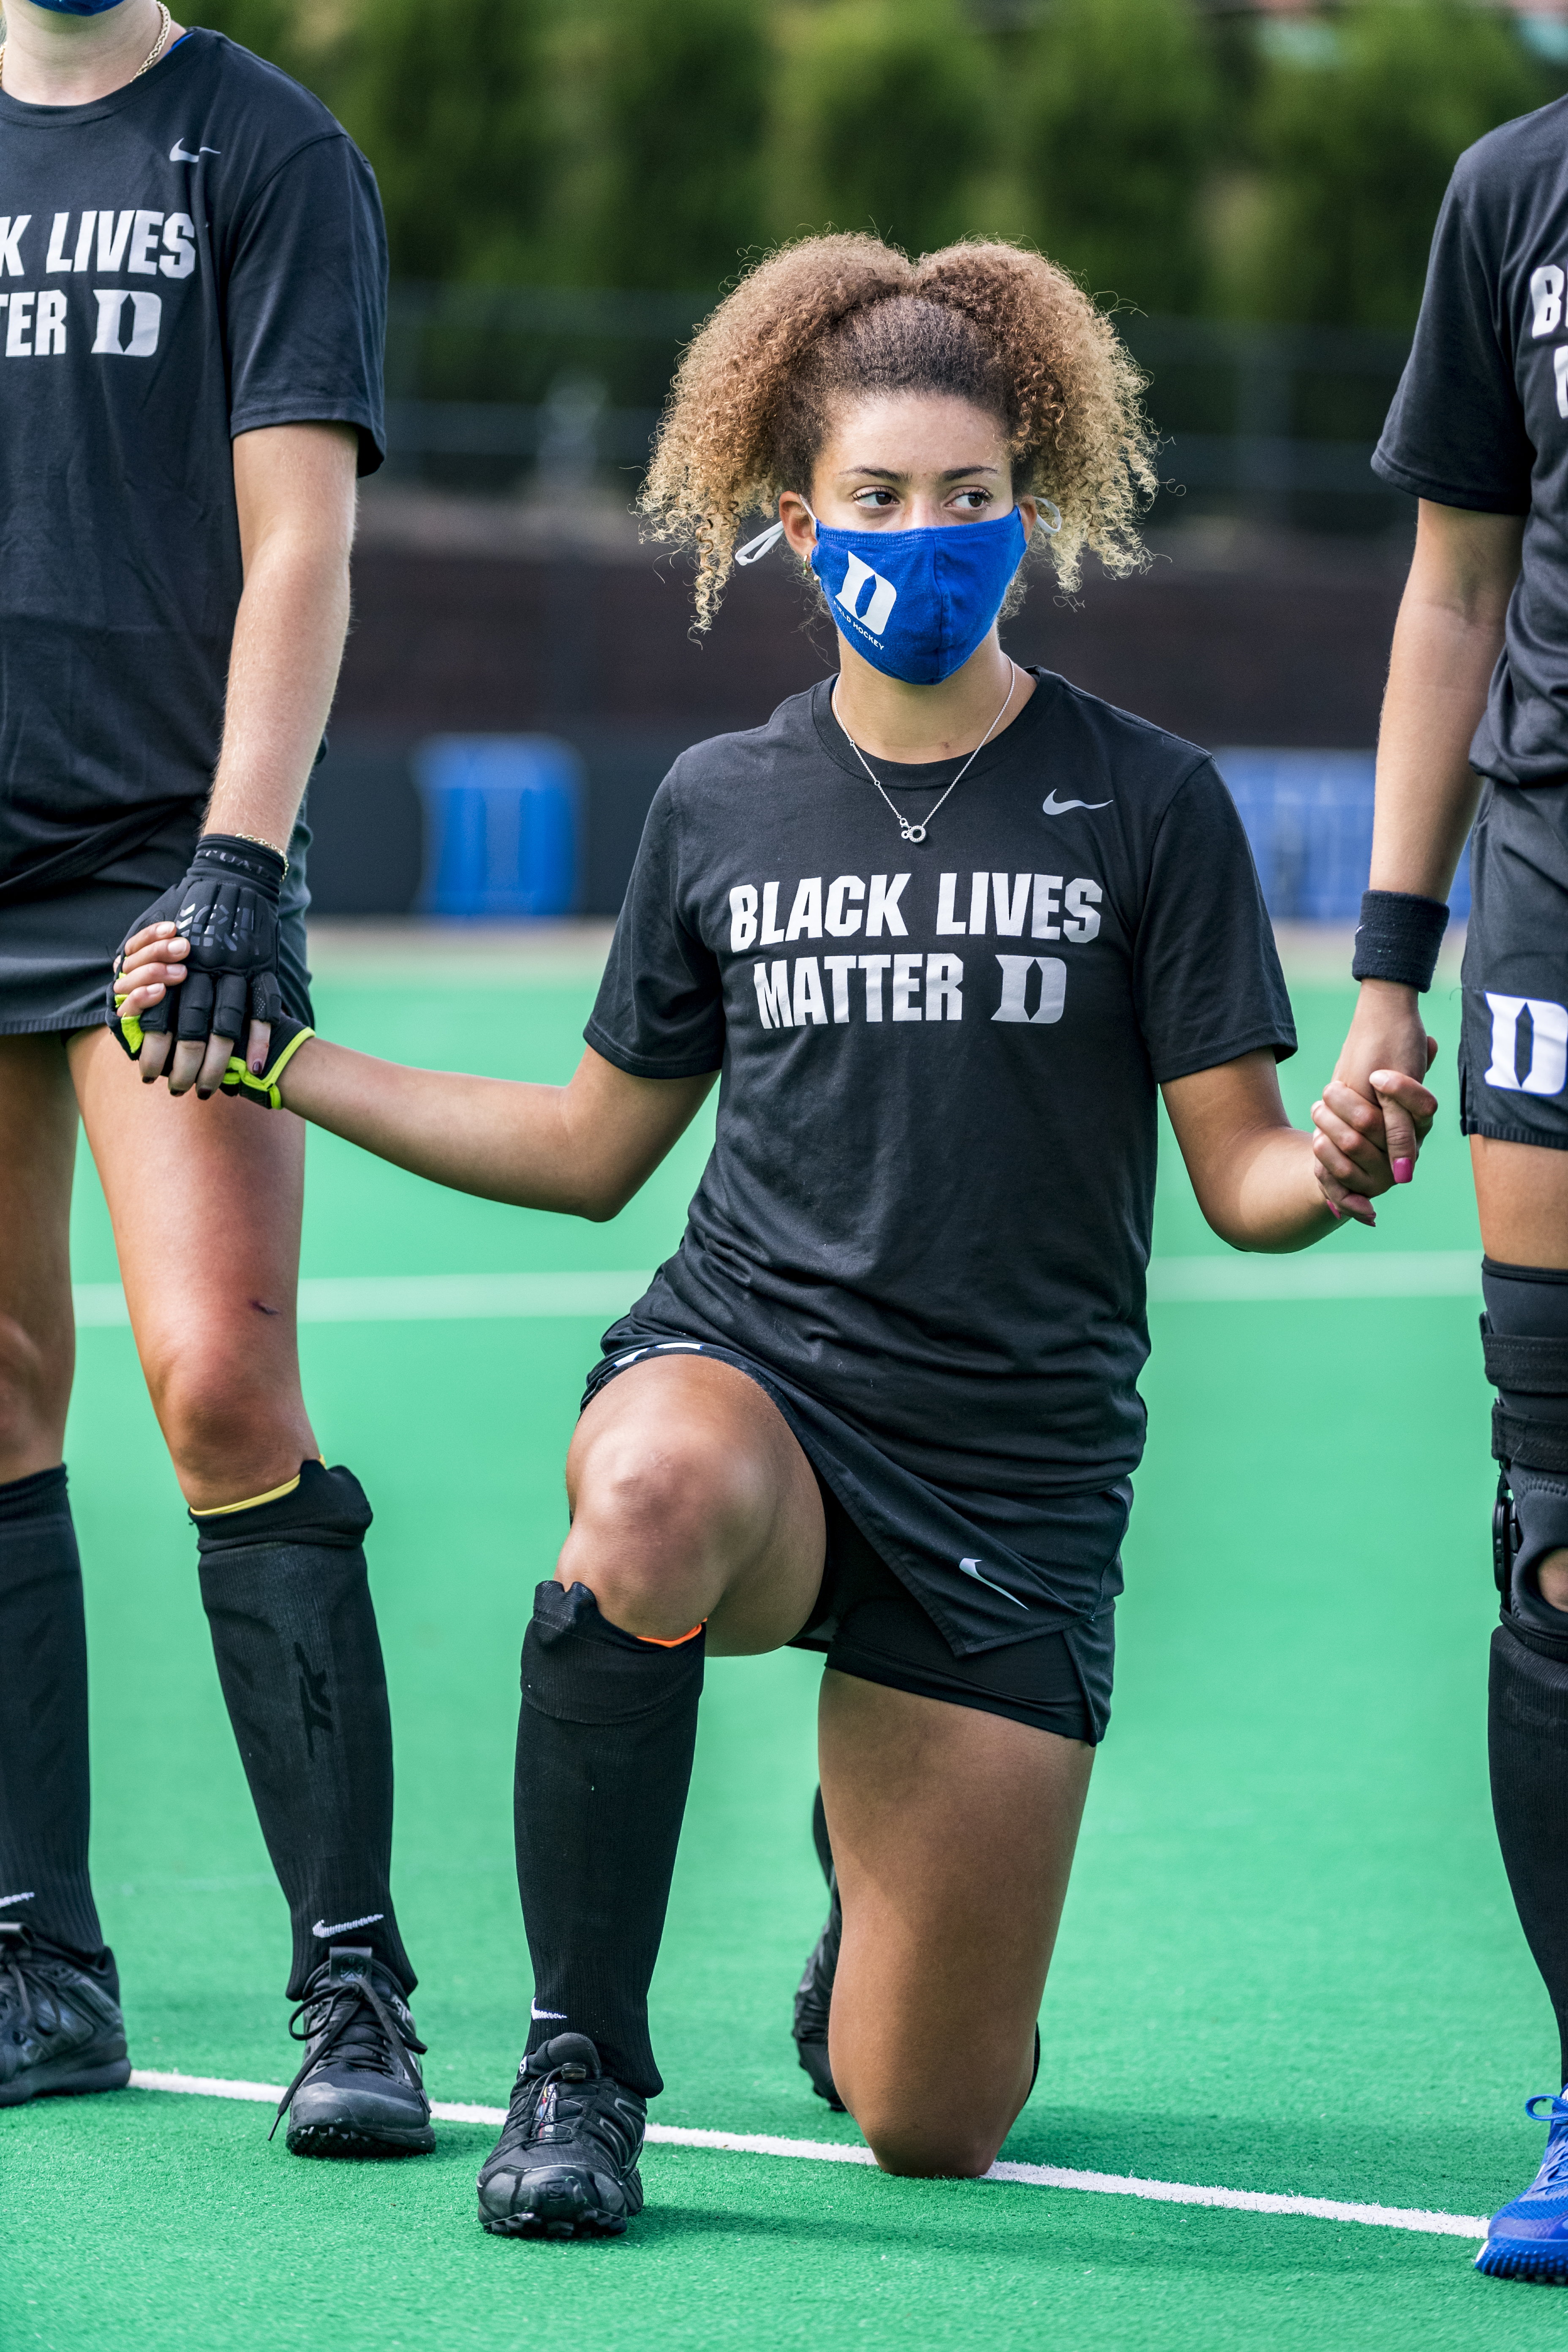 Darcy Bourne takes the knee while wearing a Black Lives Matter T-shirt